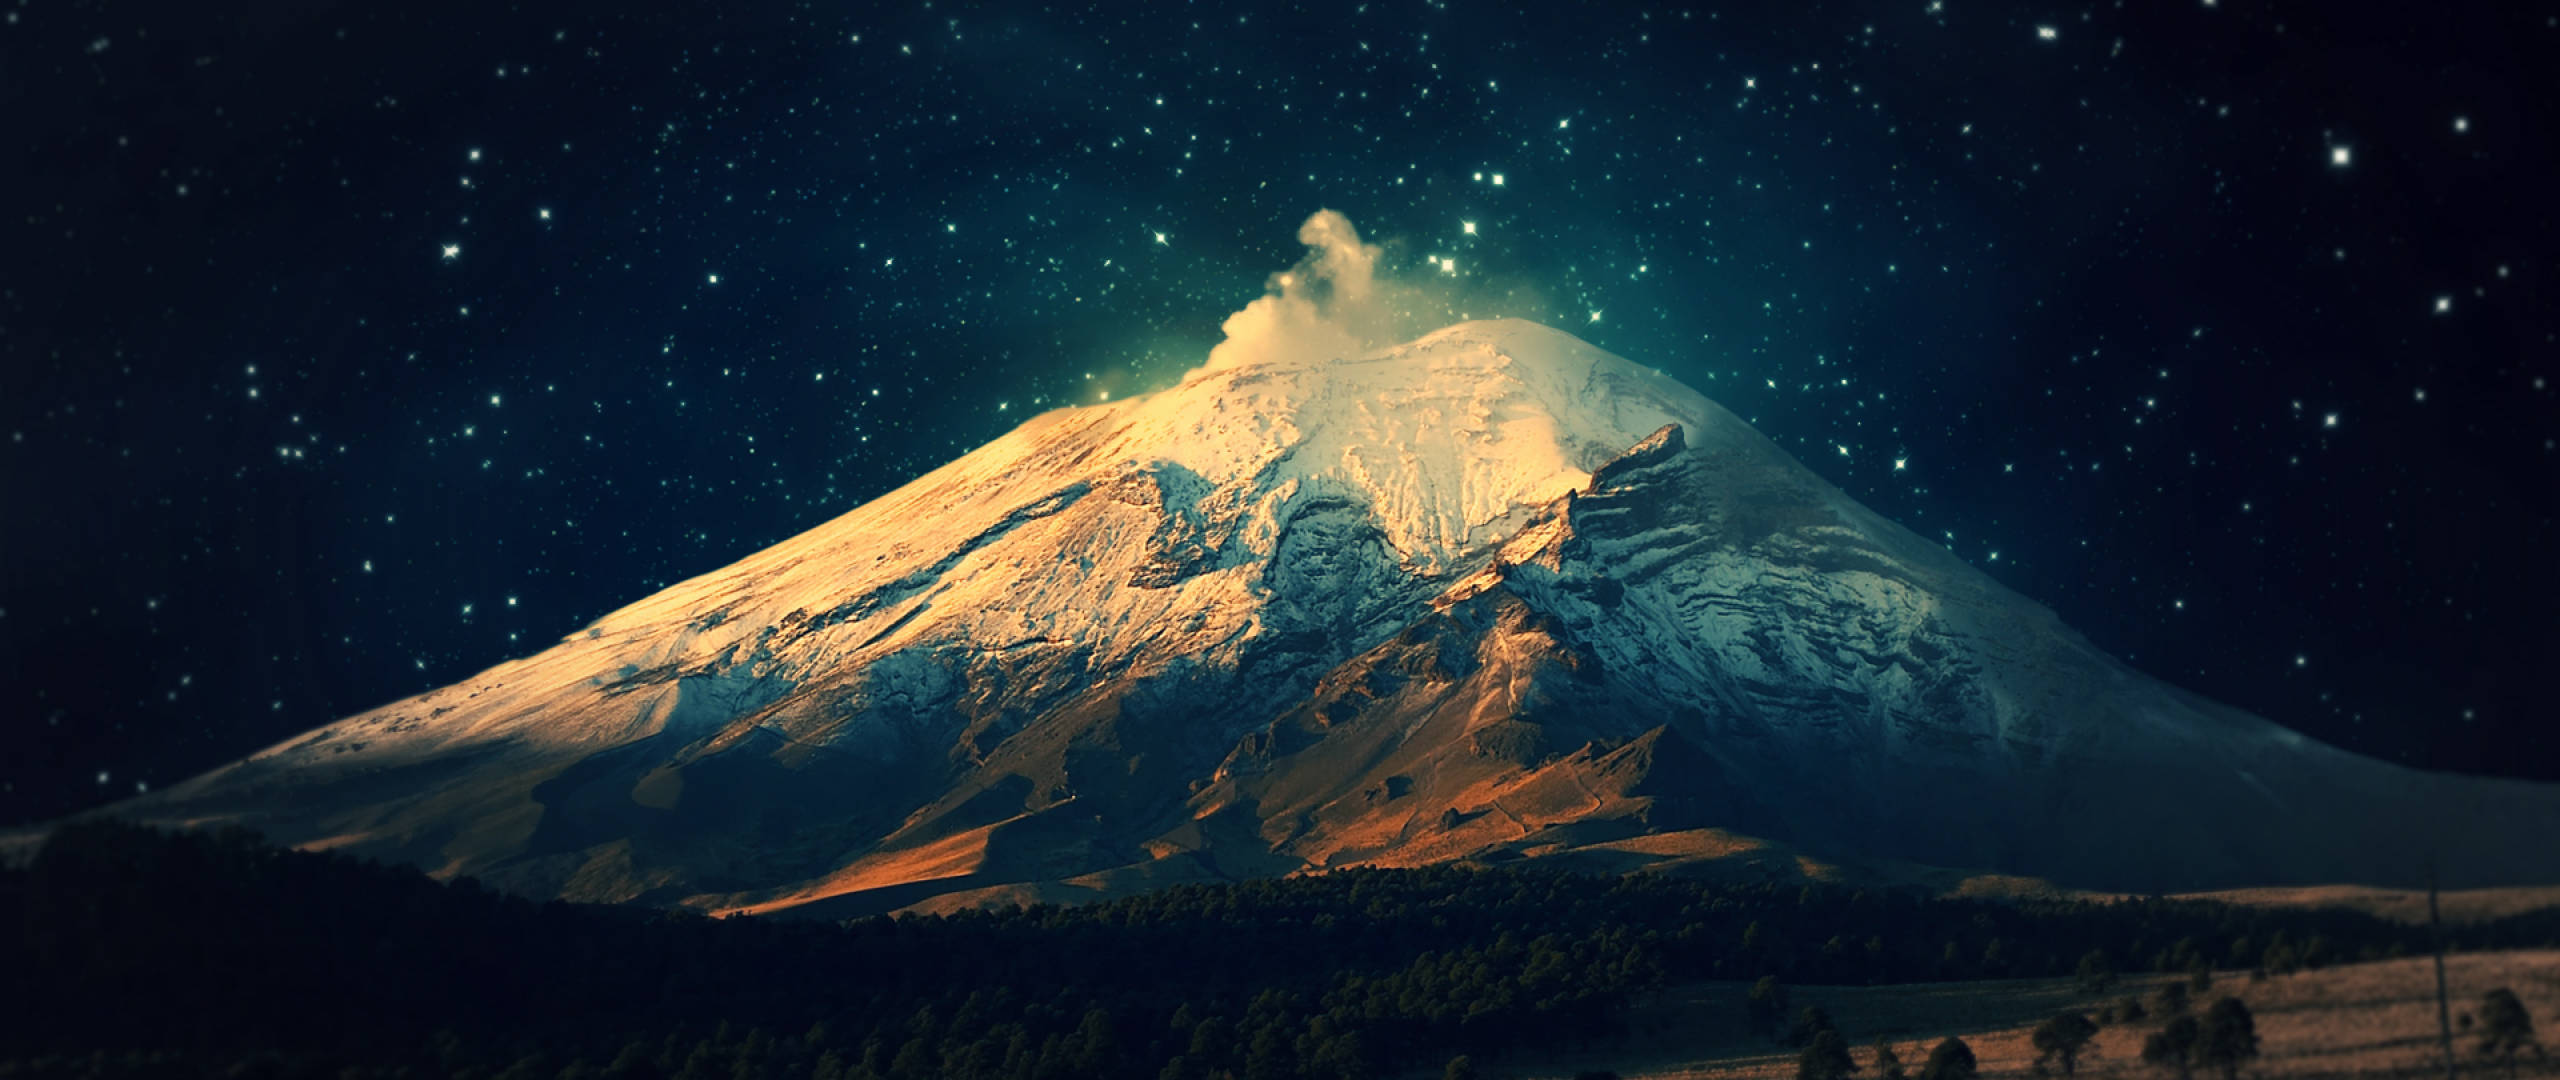 Huge Mountain In Starry Night Background